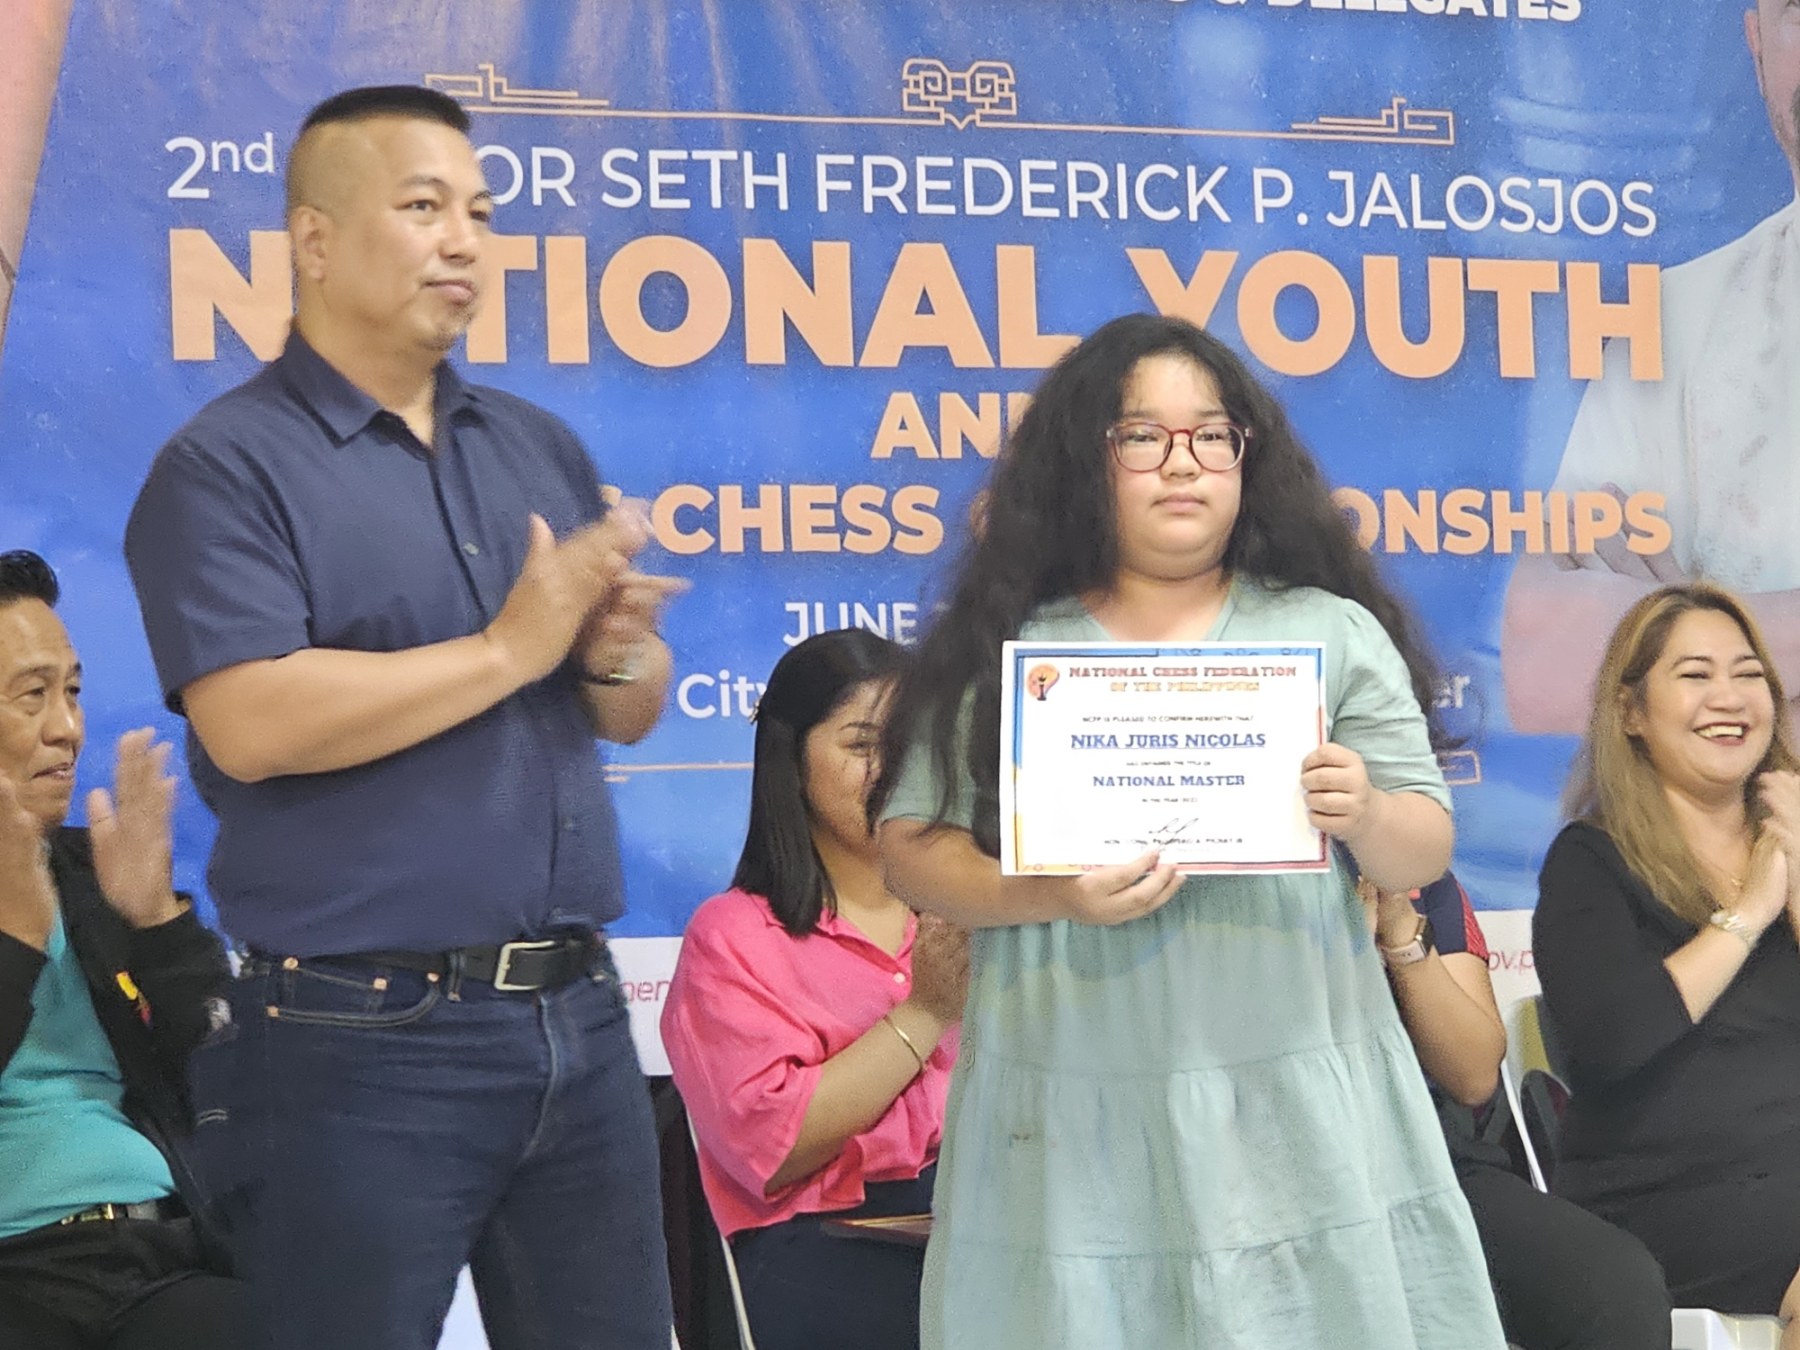 Grandmaster Jayson Gonzales, Chief Executive Officer of the National Chess Federation of the Philippines, with National Master Nika Juris Nicolas